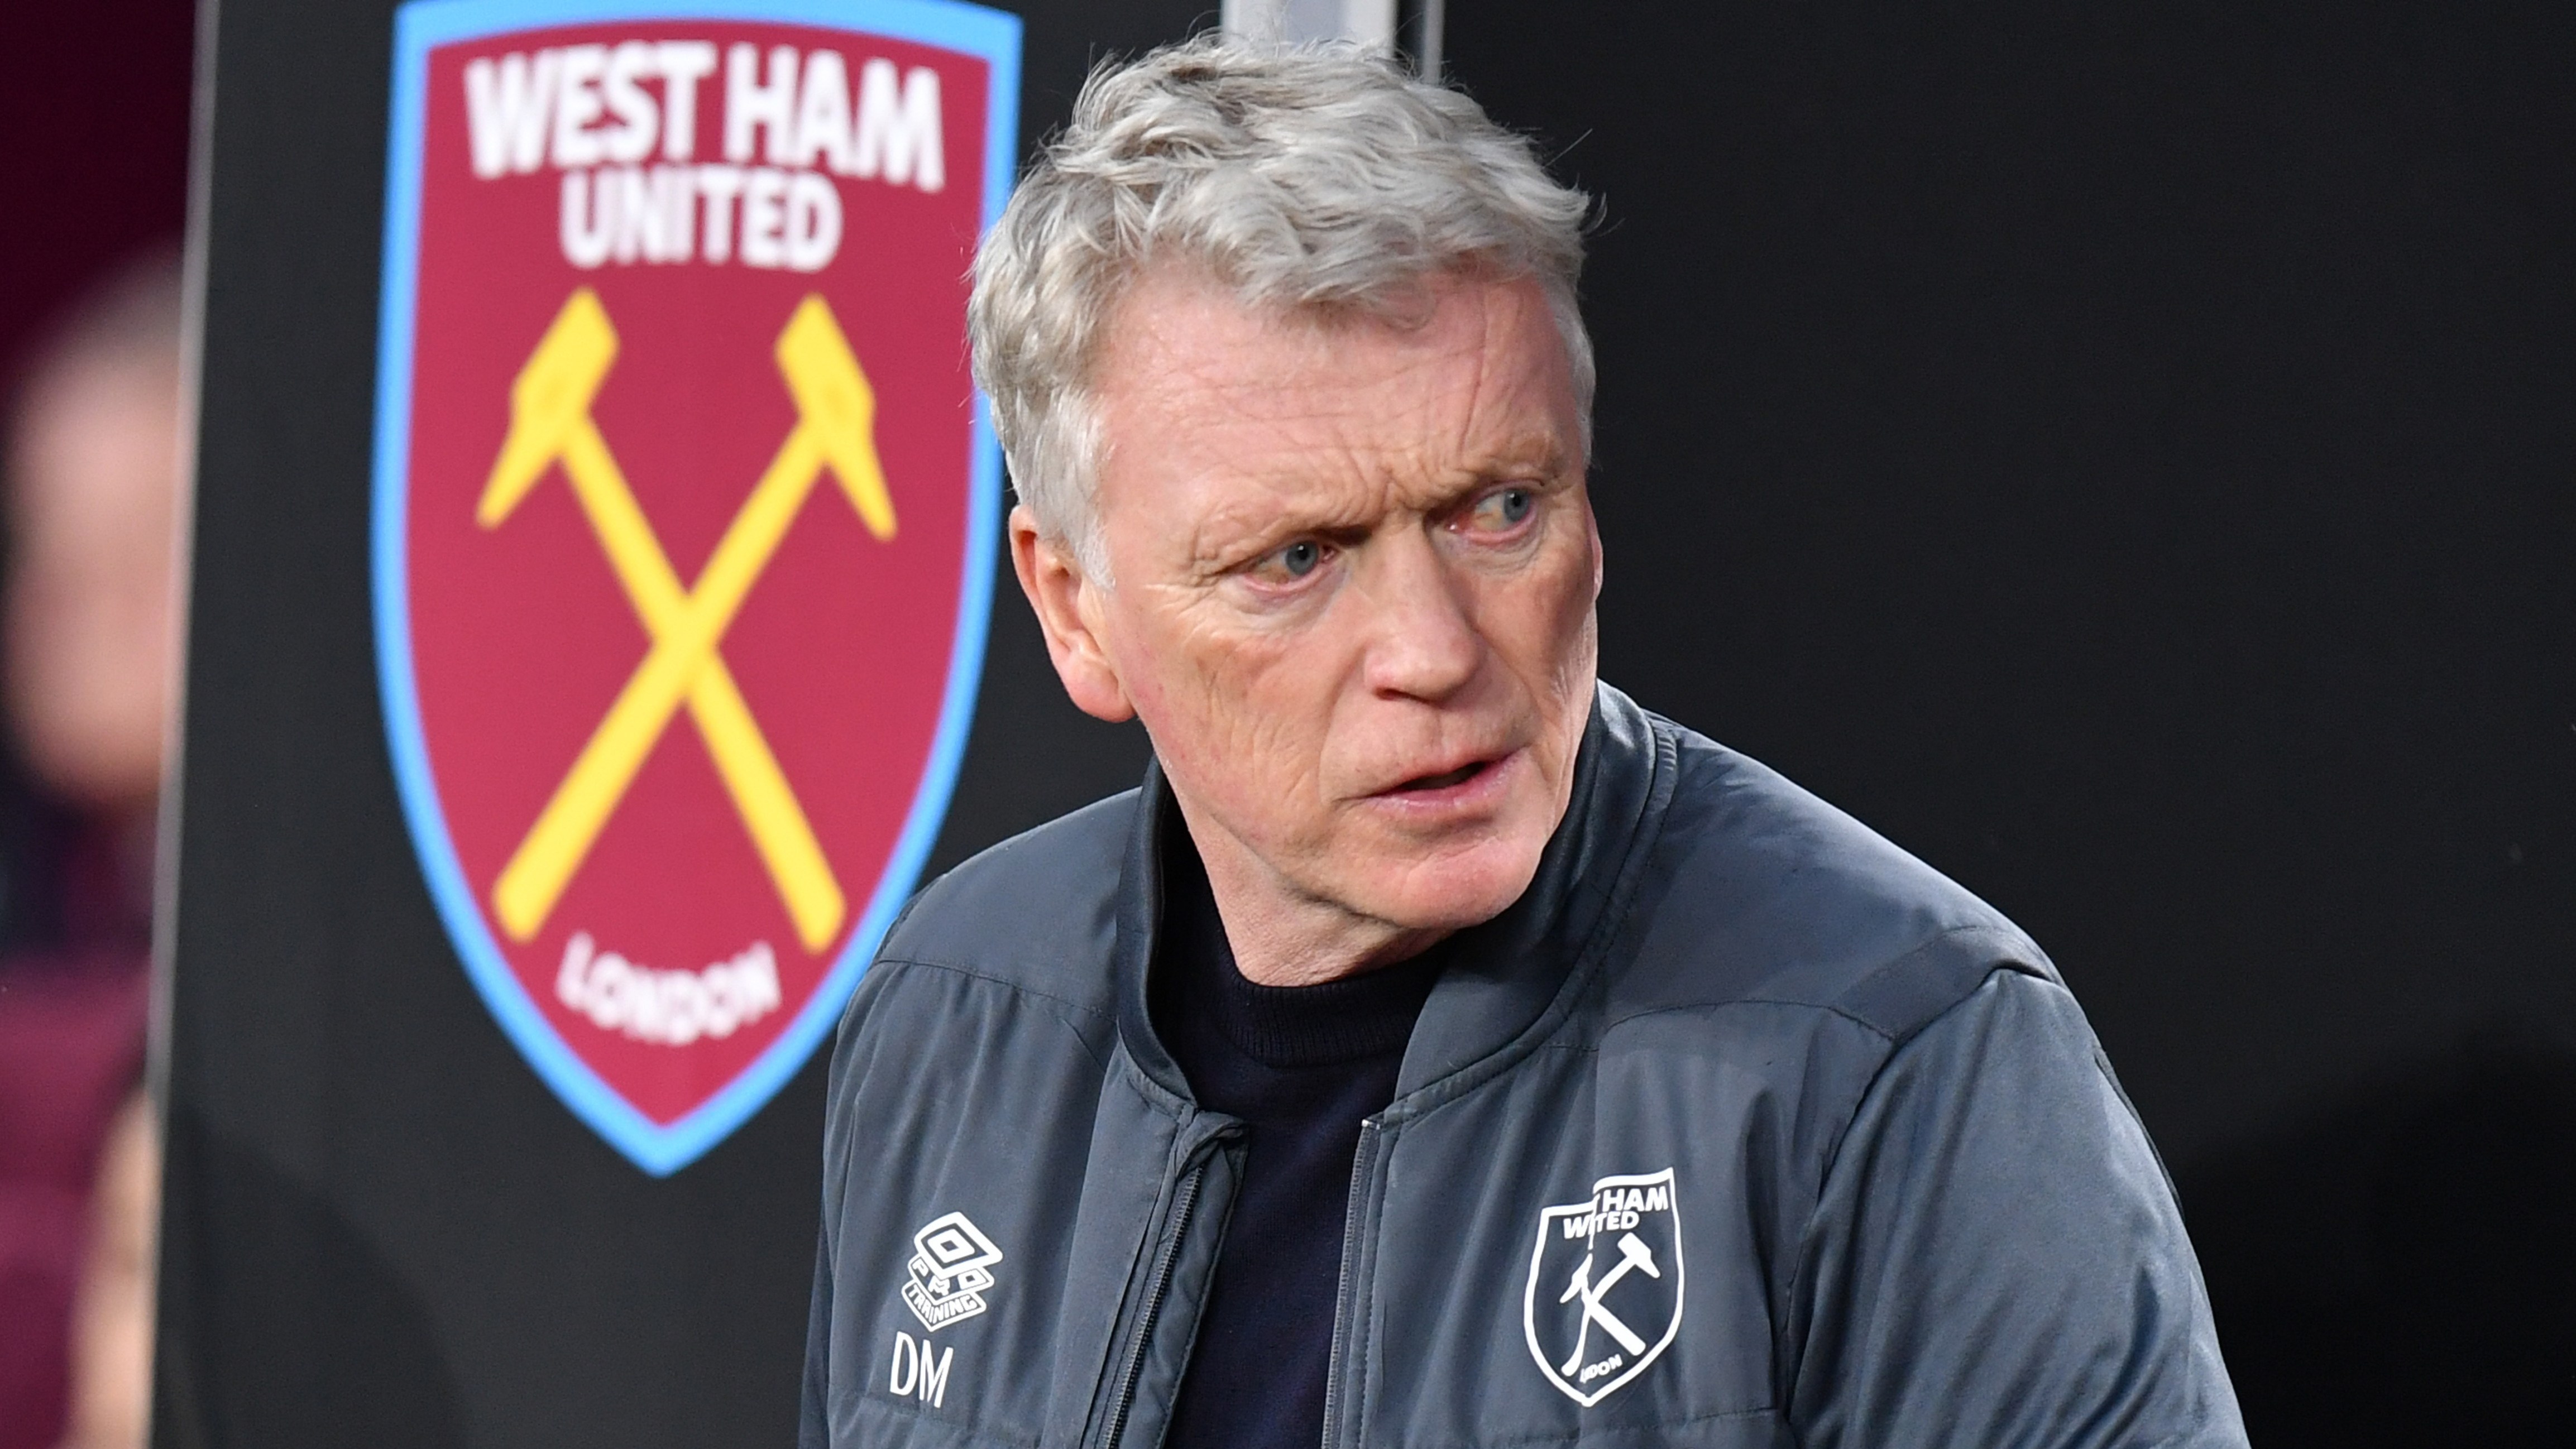 Since Moyes was offered a new two-year deal in January, West Ham have won only four matches